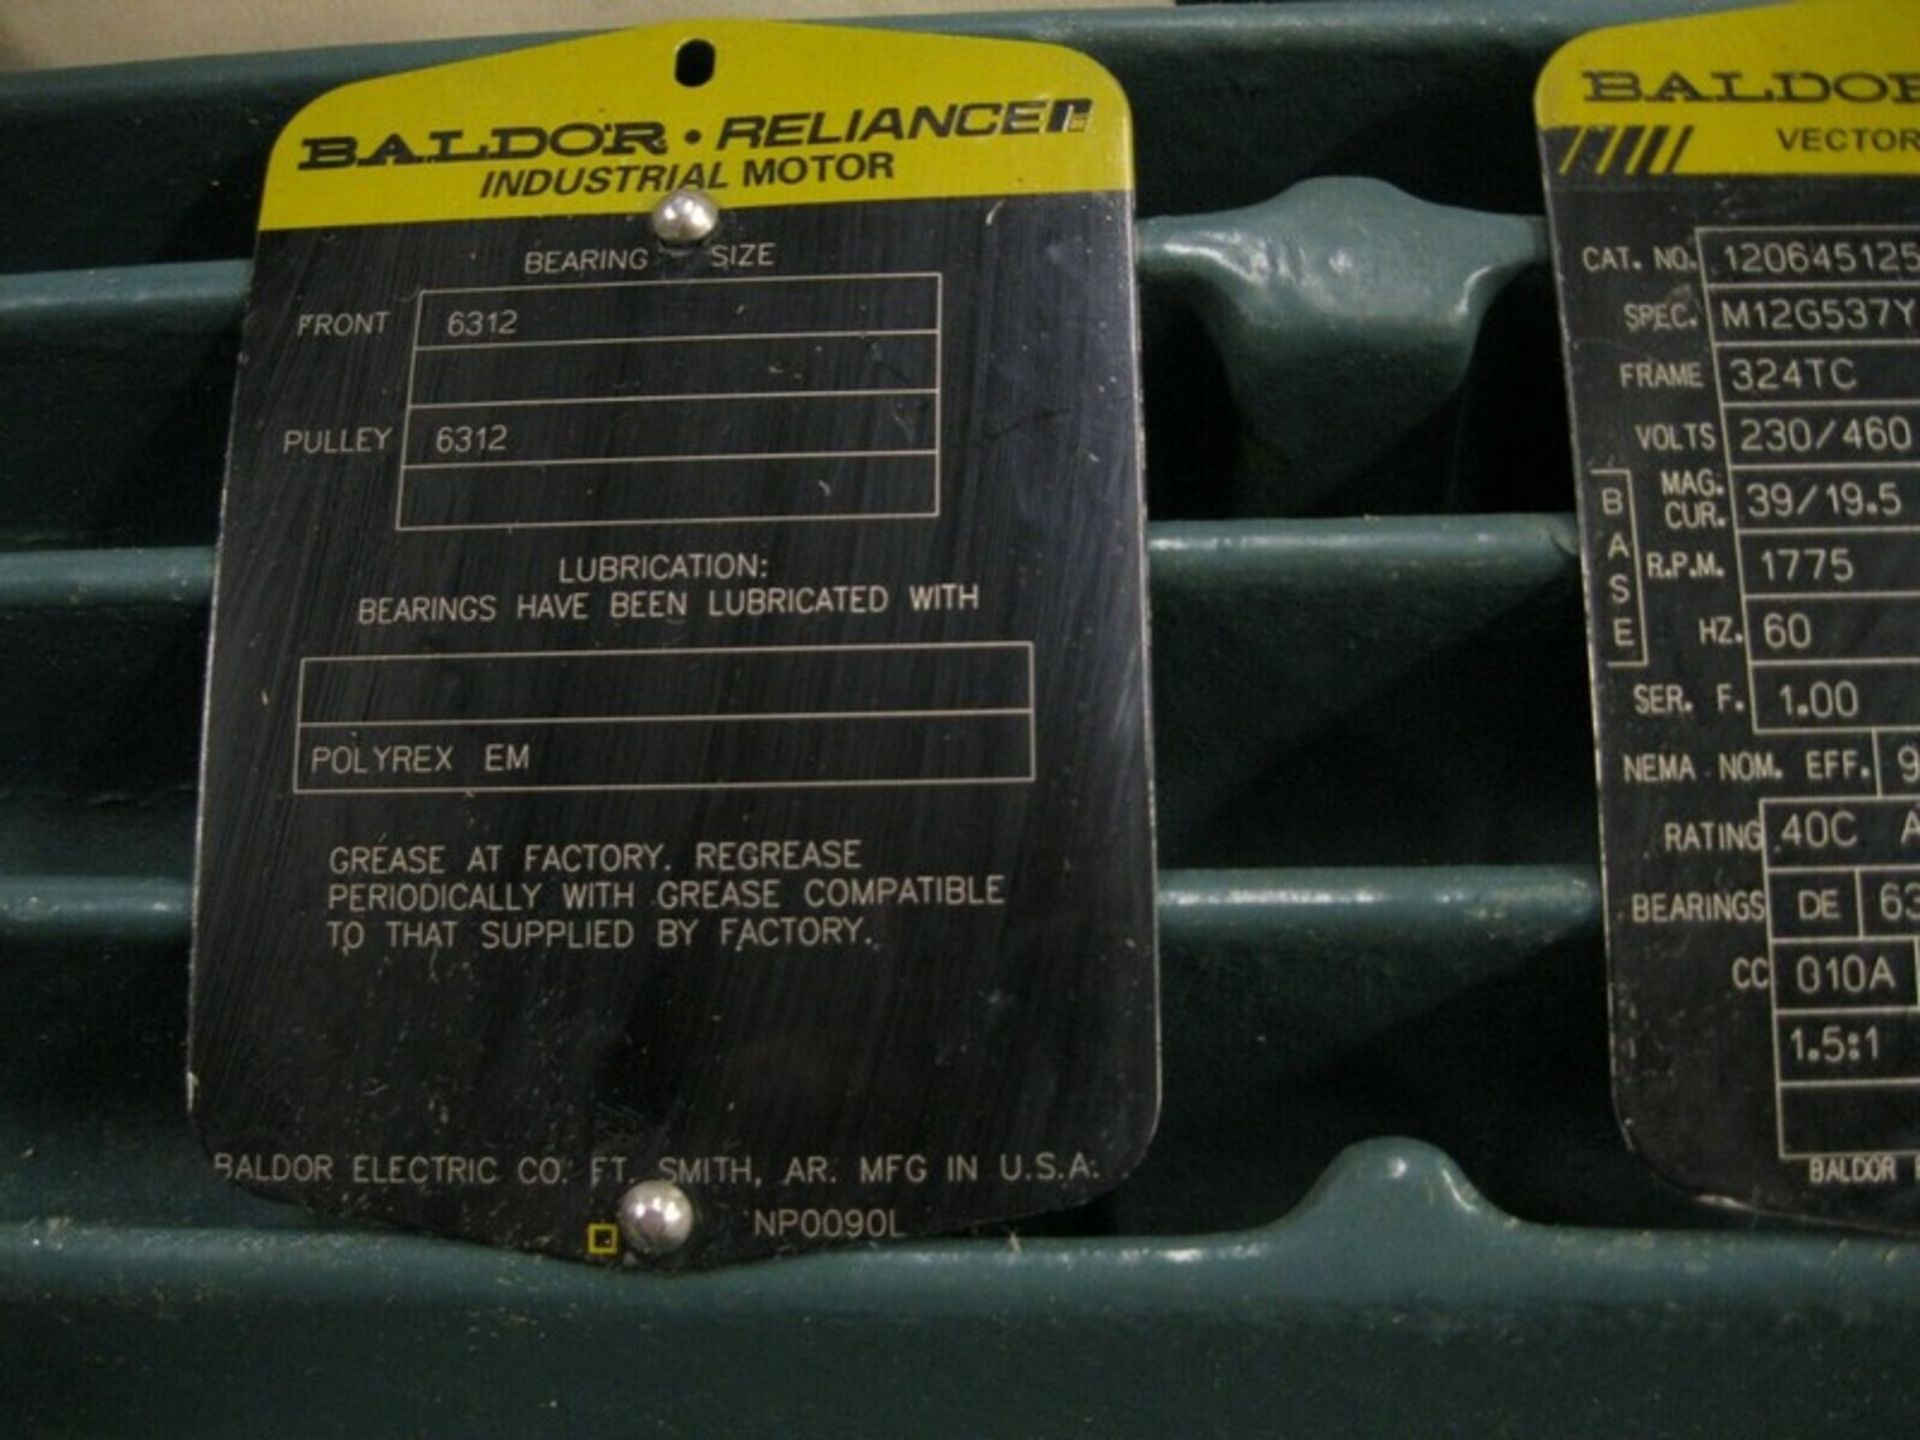 Baldor Vector Drive 1206451253-000020 40 HP Motor 230/460V NEW (NOTE: Packing and Palletizing Can - Image 5 of 5